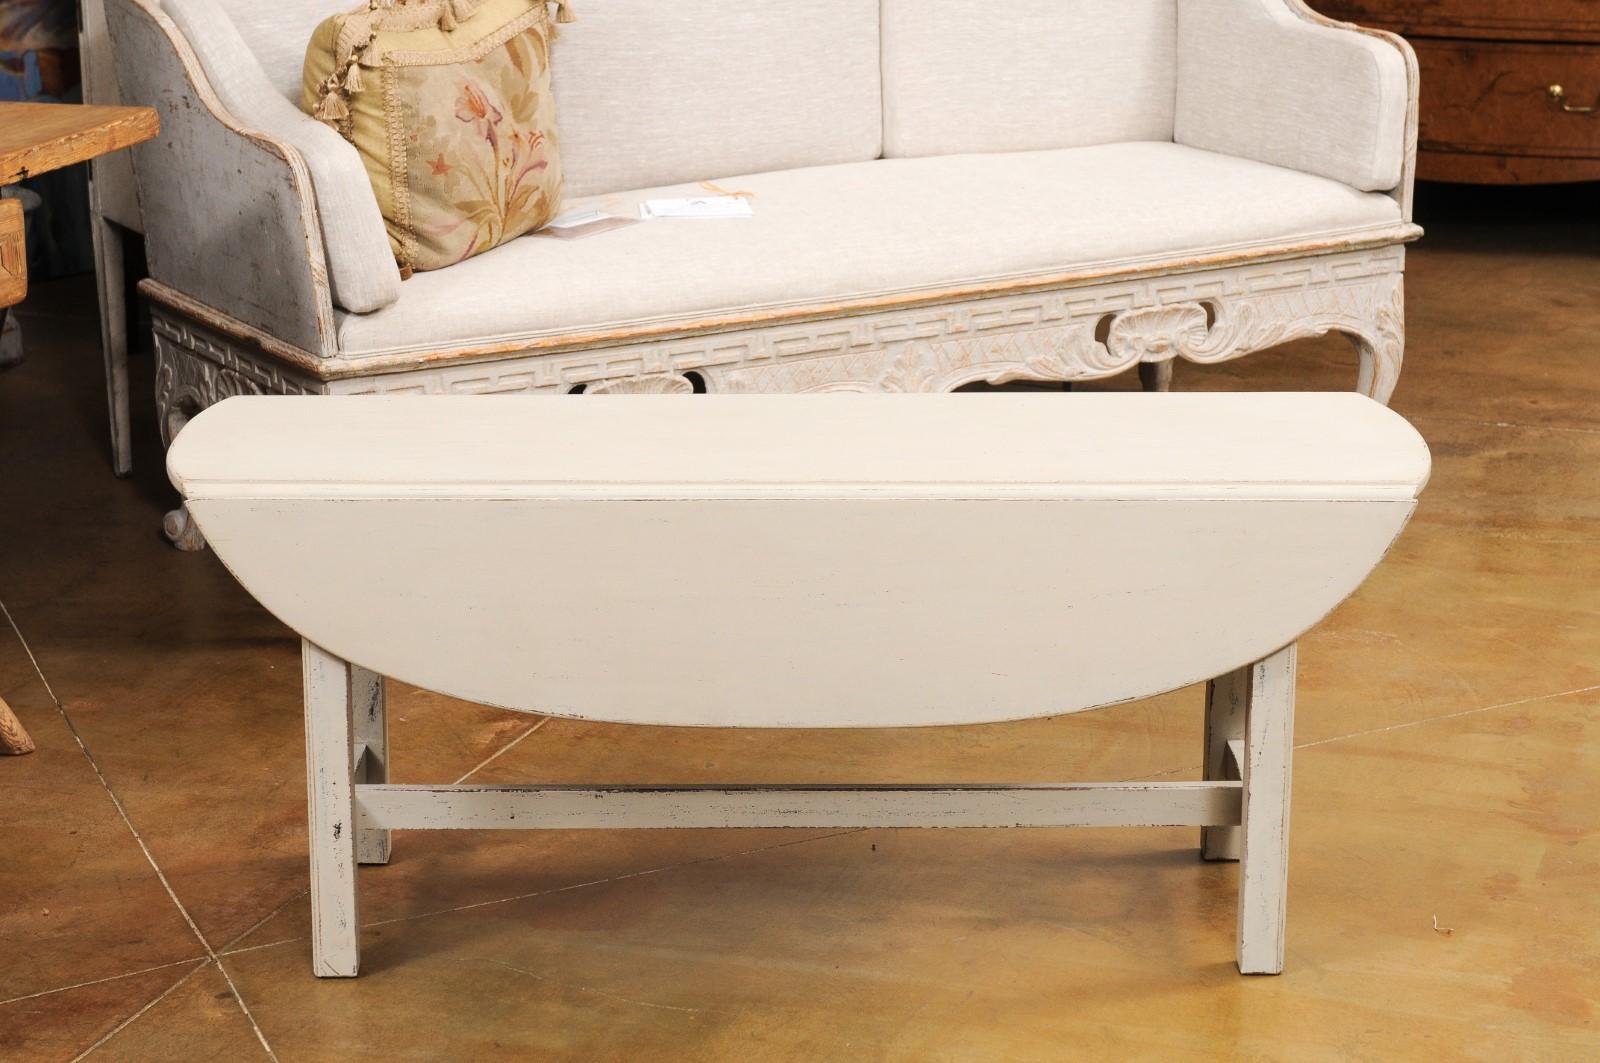 Swedish 1920s Painted Drop Leaf Coffee Table with Oval Top and Stretcher In Good Condition For Sale In Atlanta, GA